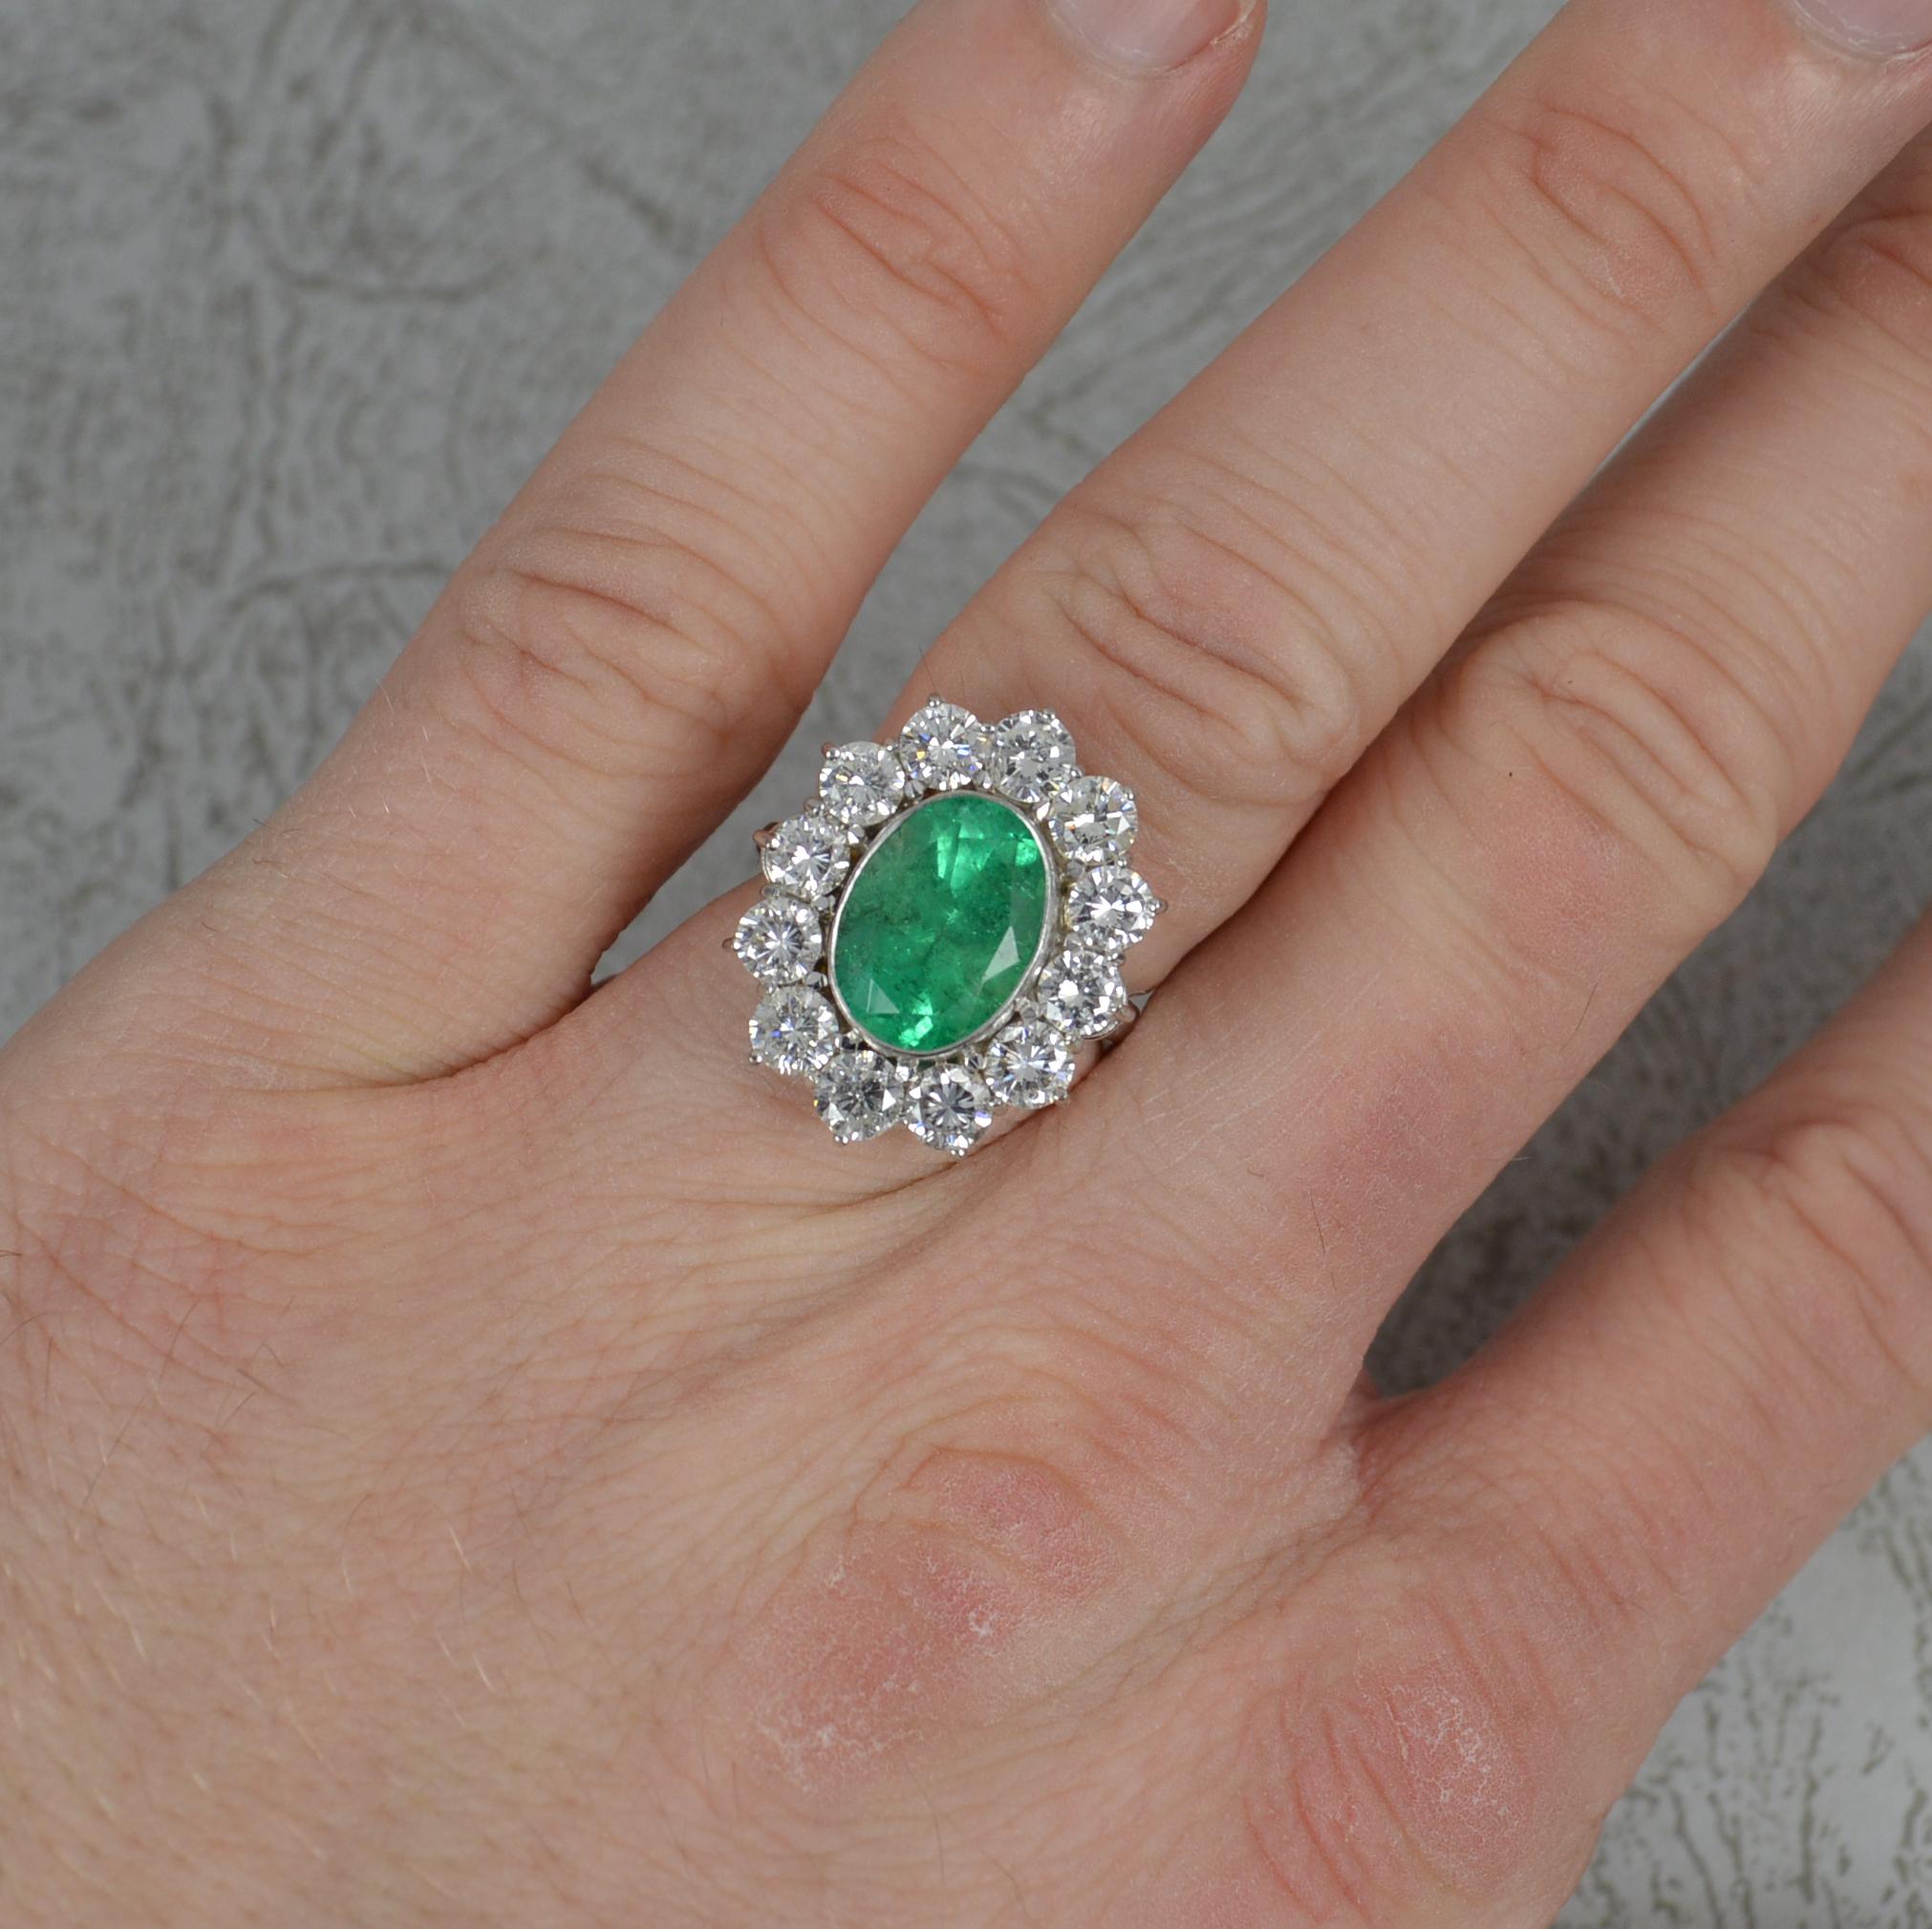 A stunning natural Emerald and Diamond ring.
Modelled in 950 grade platinum.
Designed with an oval cut emerald to centre in full grain bezel setting. 3.25cts. Surrounding are twelve round brilliant cut diamonds to total approx 2.00 carats. Clean,